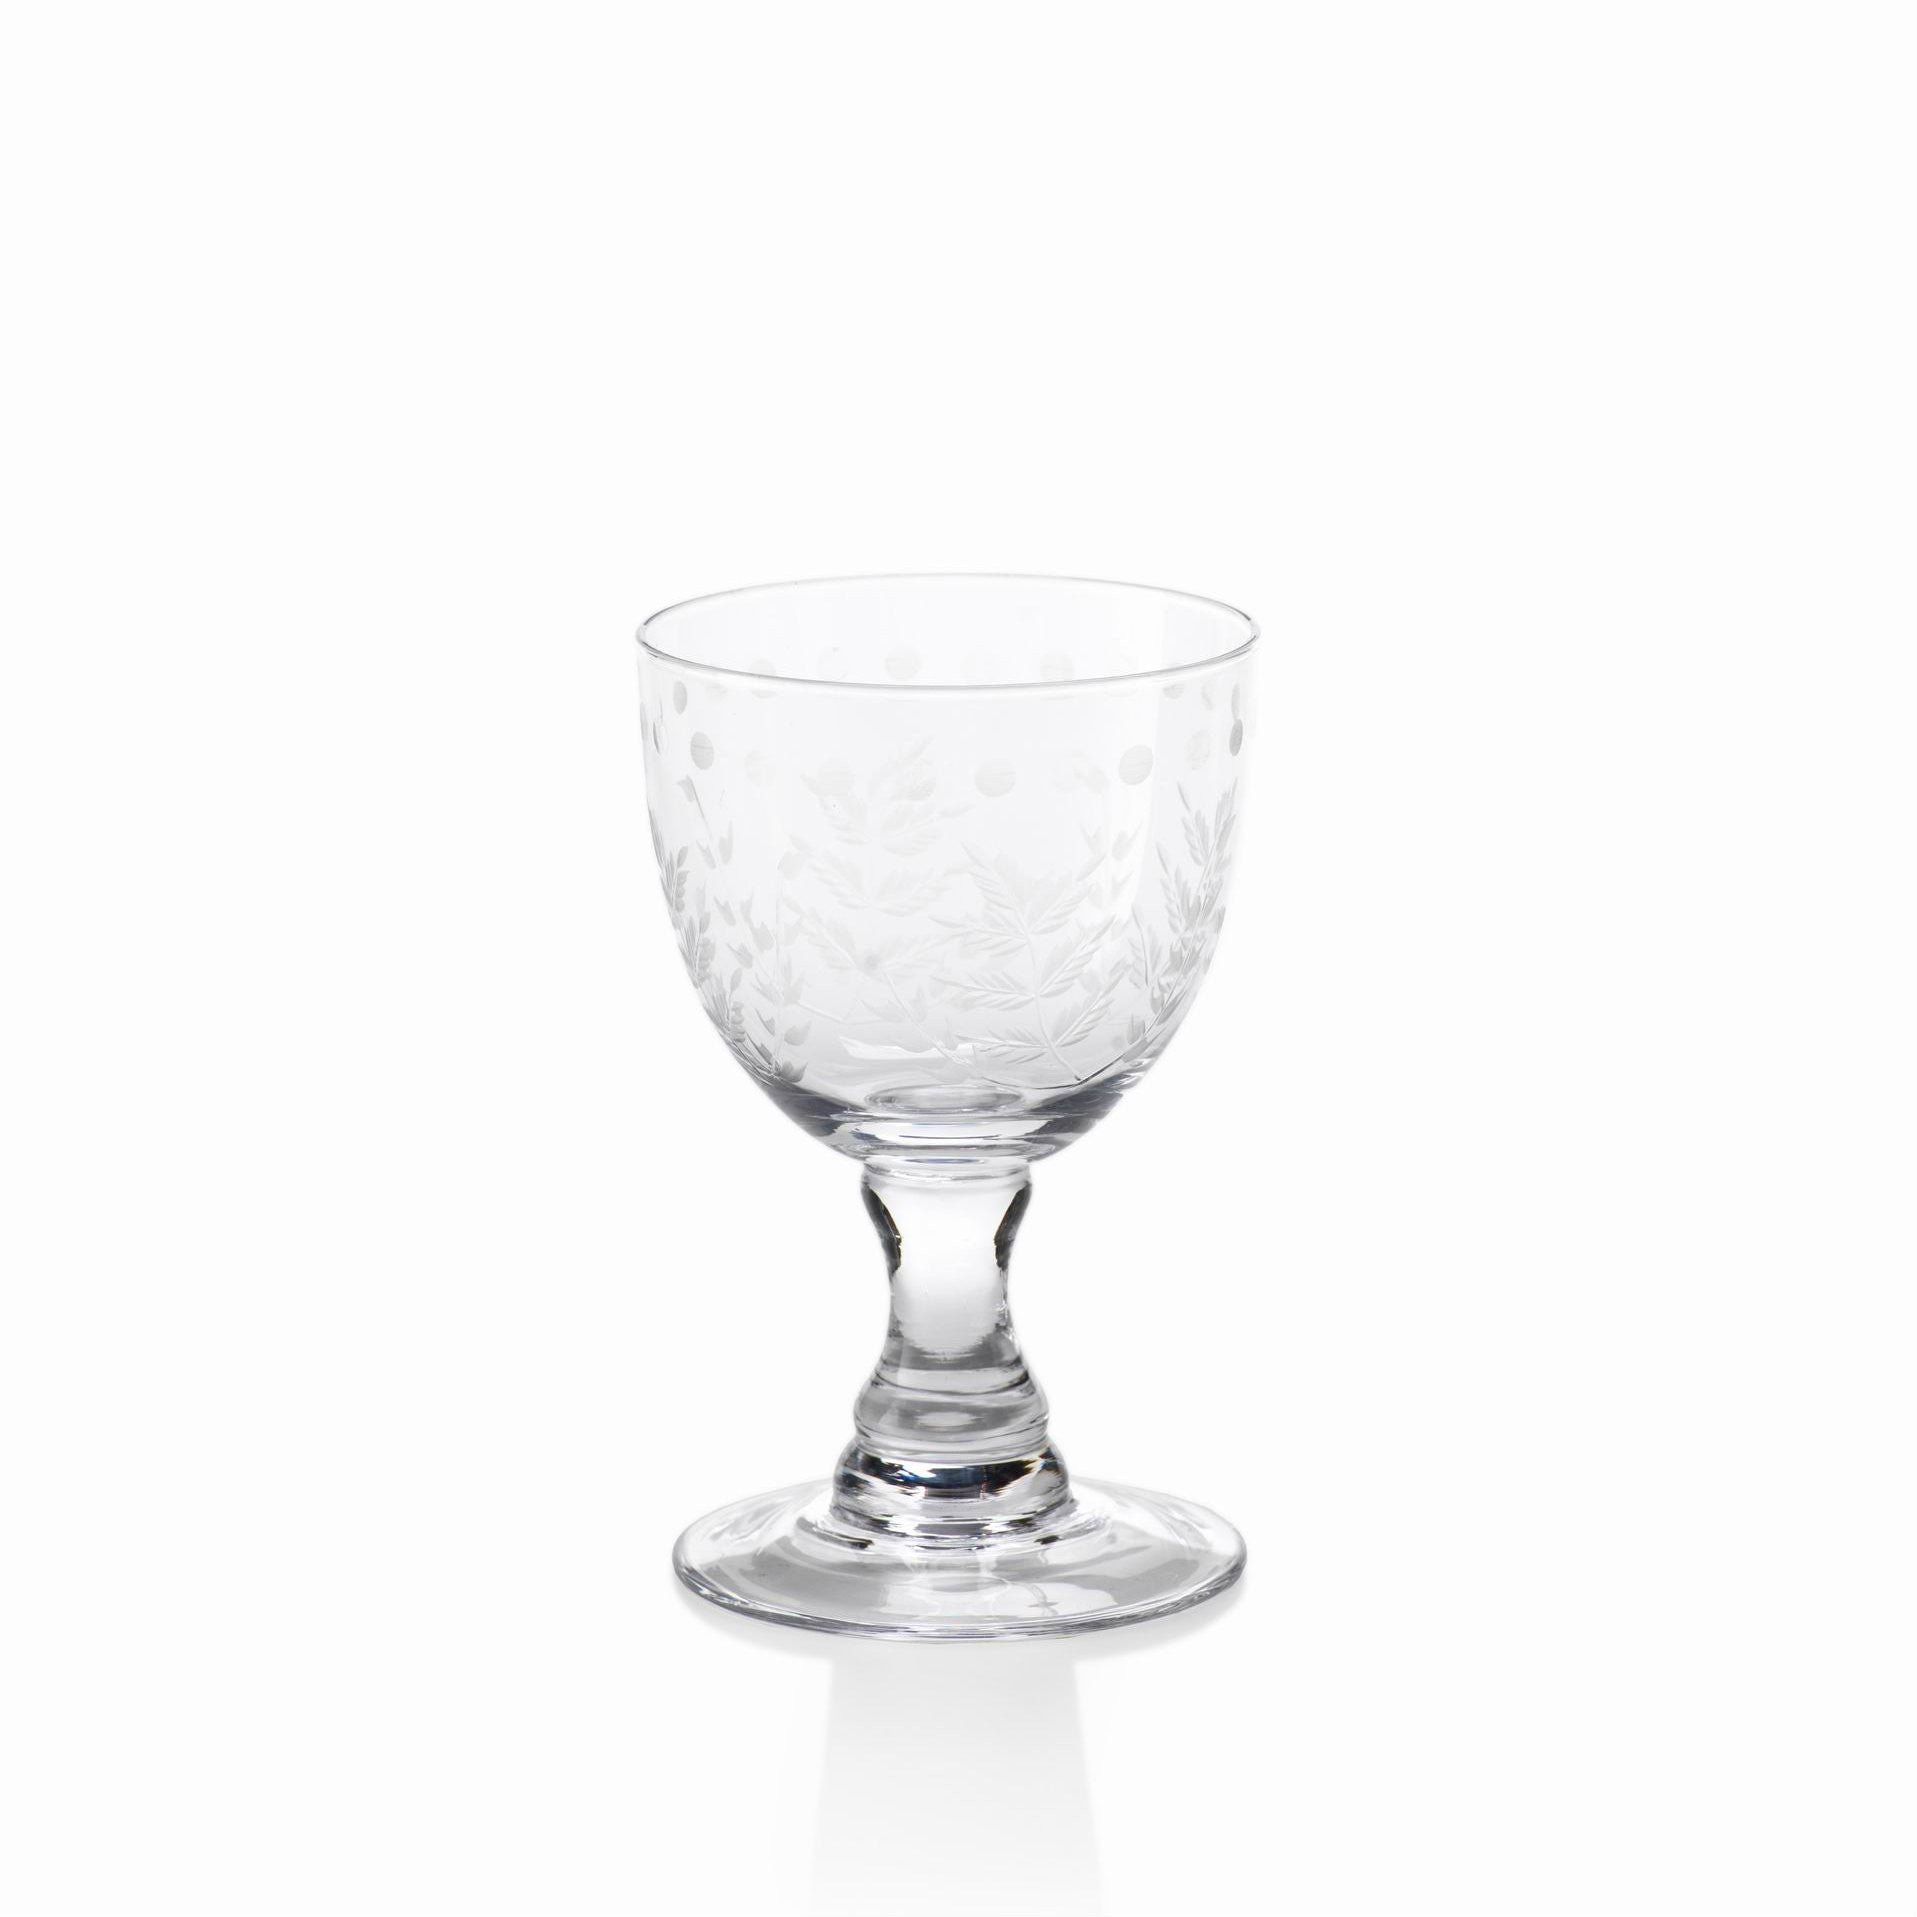 Spring Leaves Glassware - Set of 4 - CARLYLE AVENUE